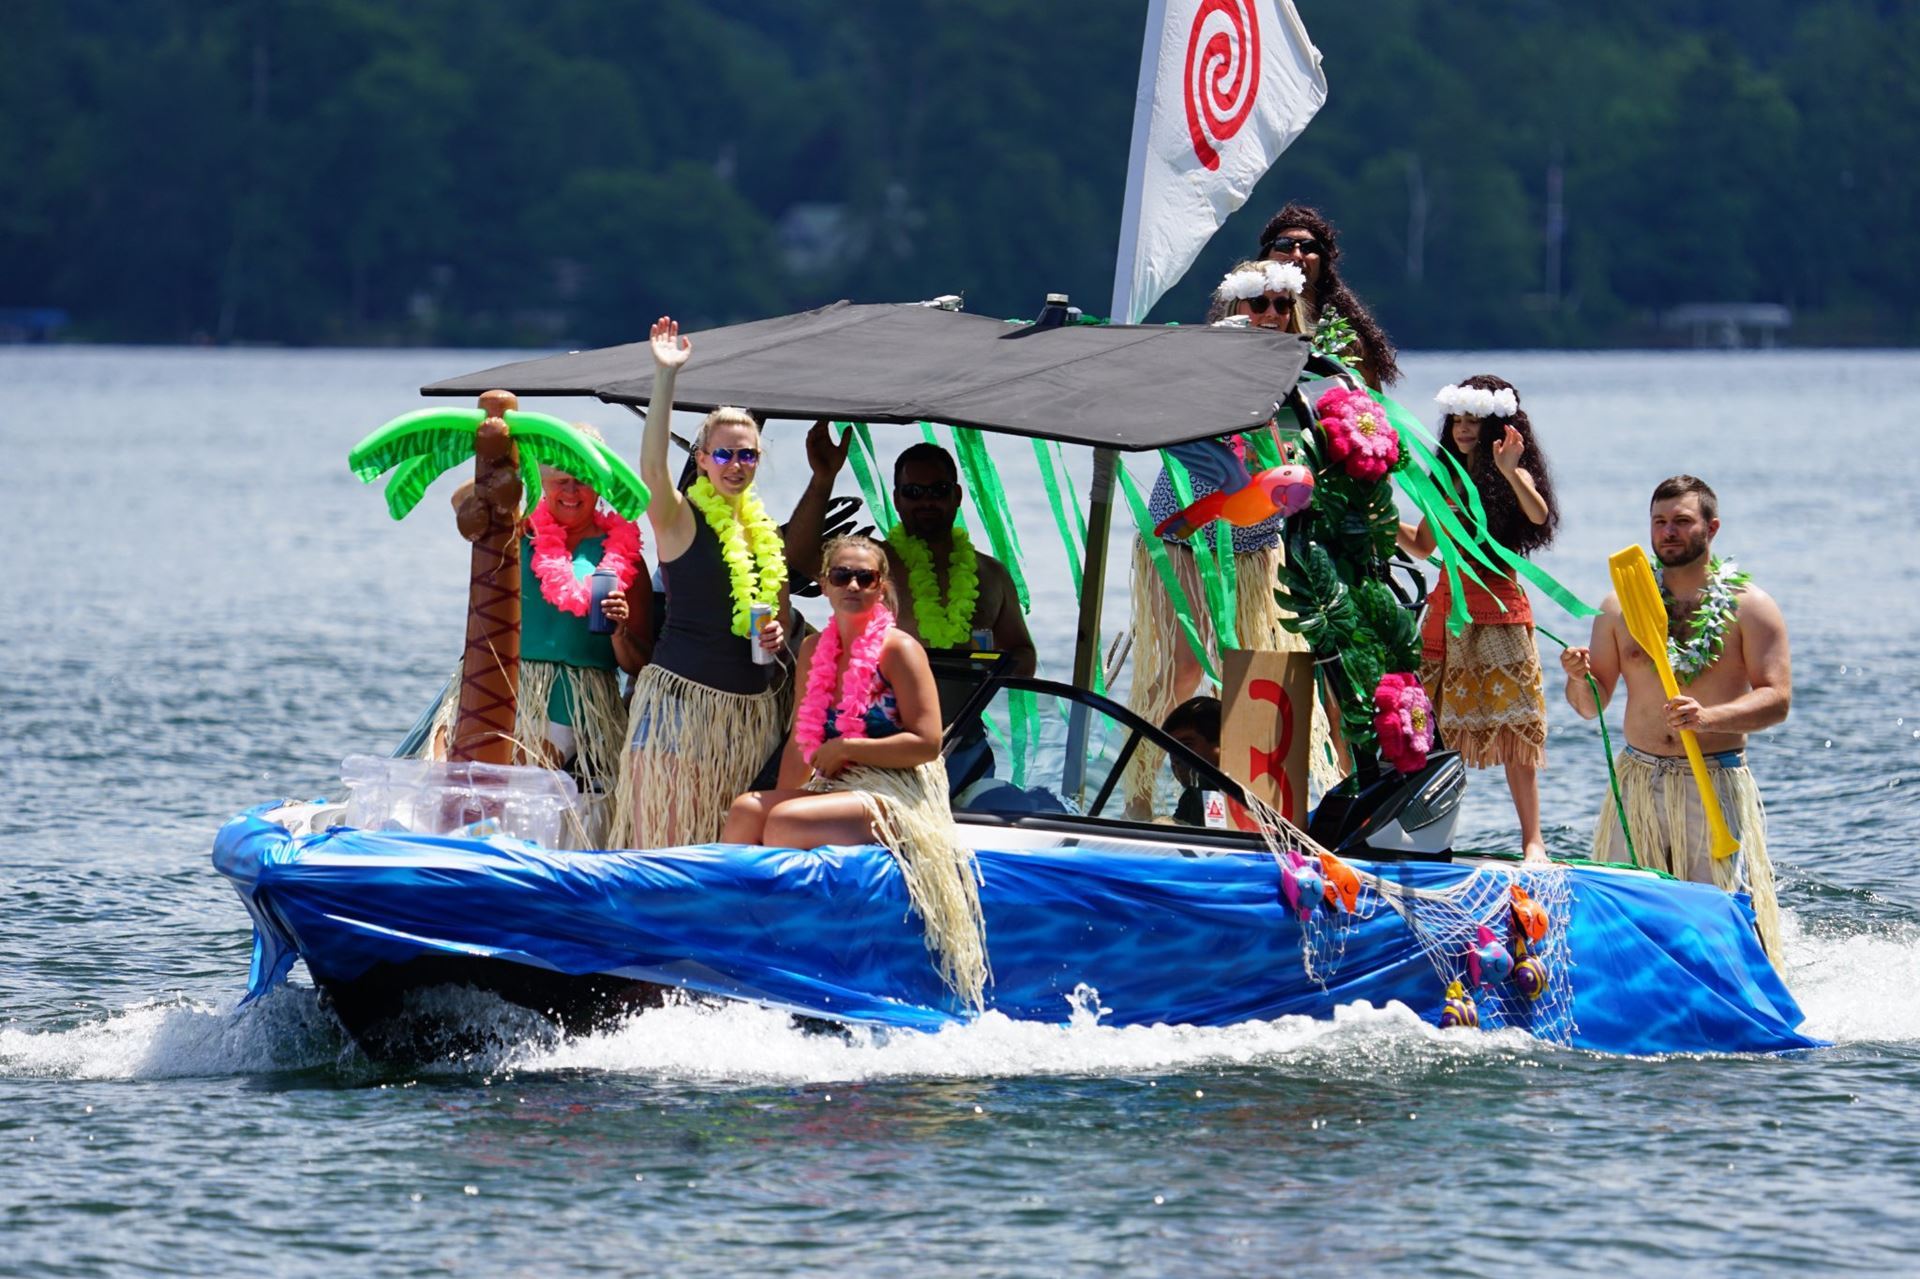 Best Overall: 1st Place: Boat #3 - Moana - Megan Frueh 